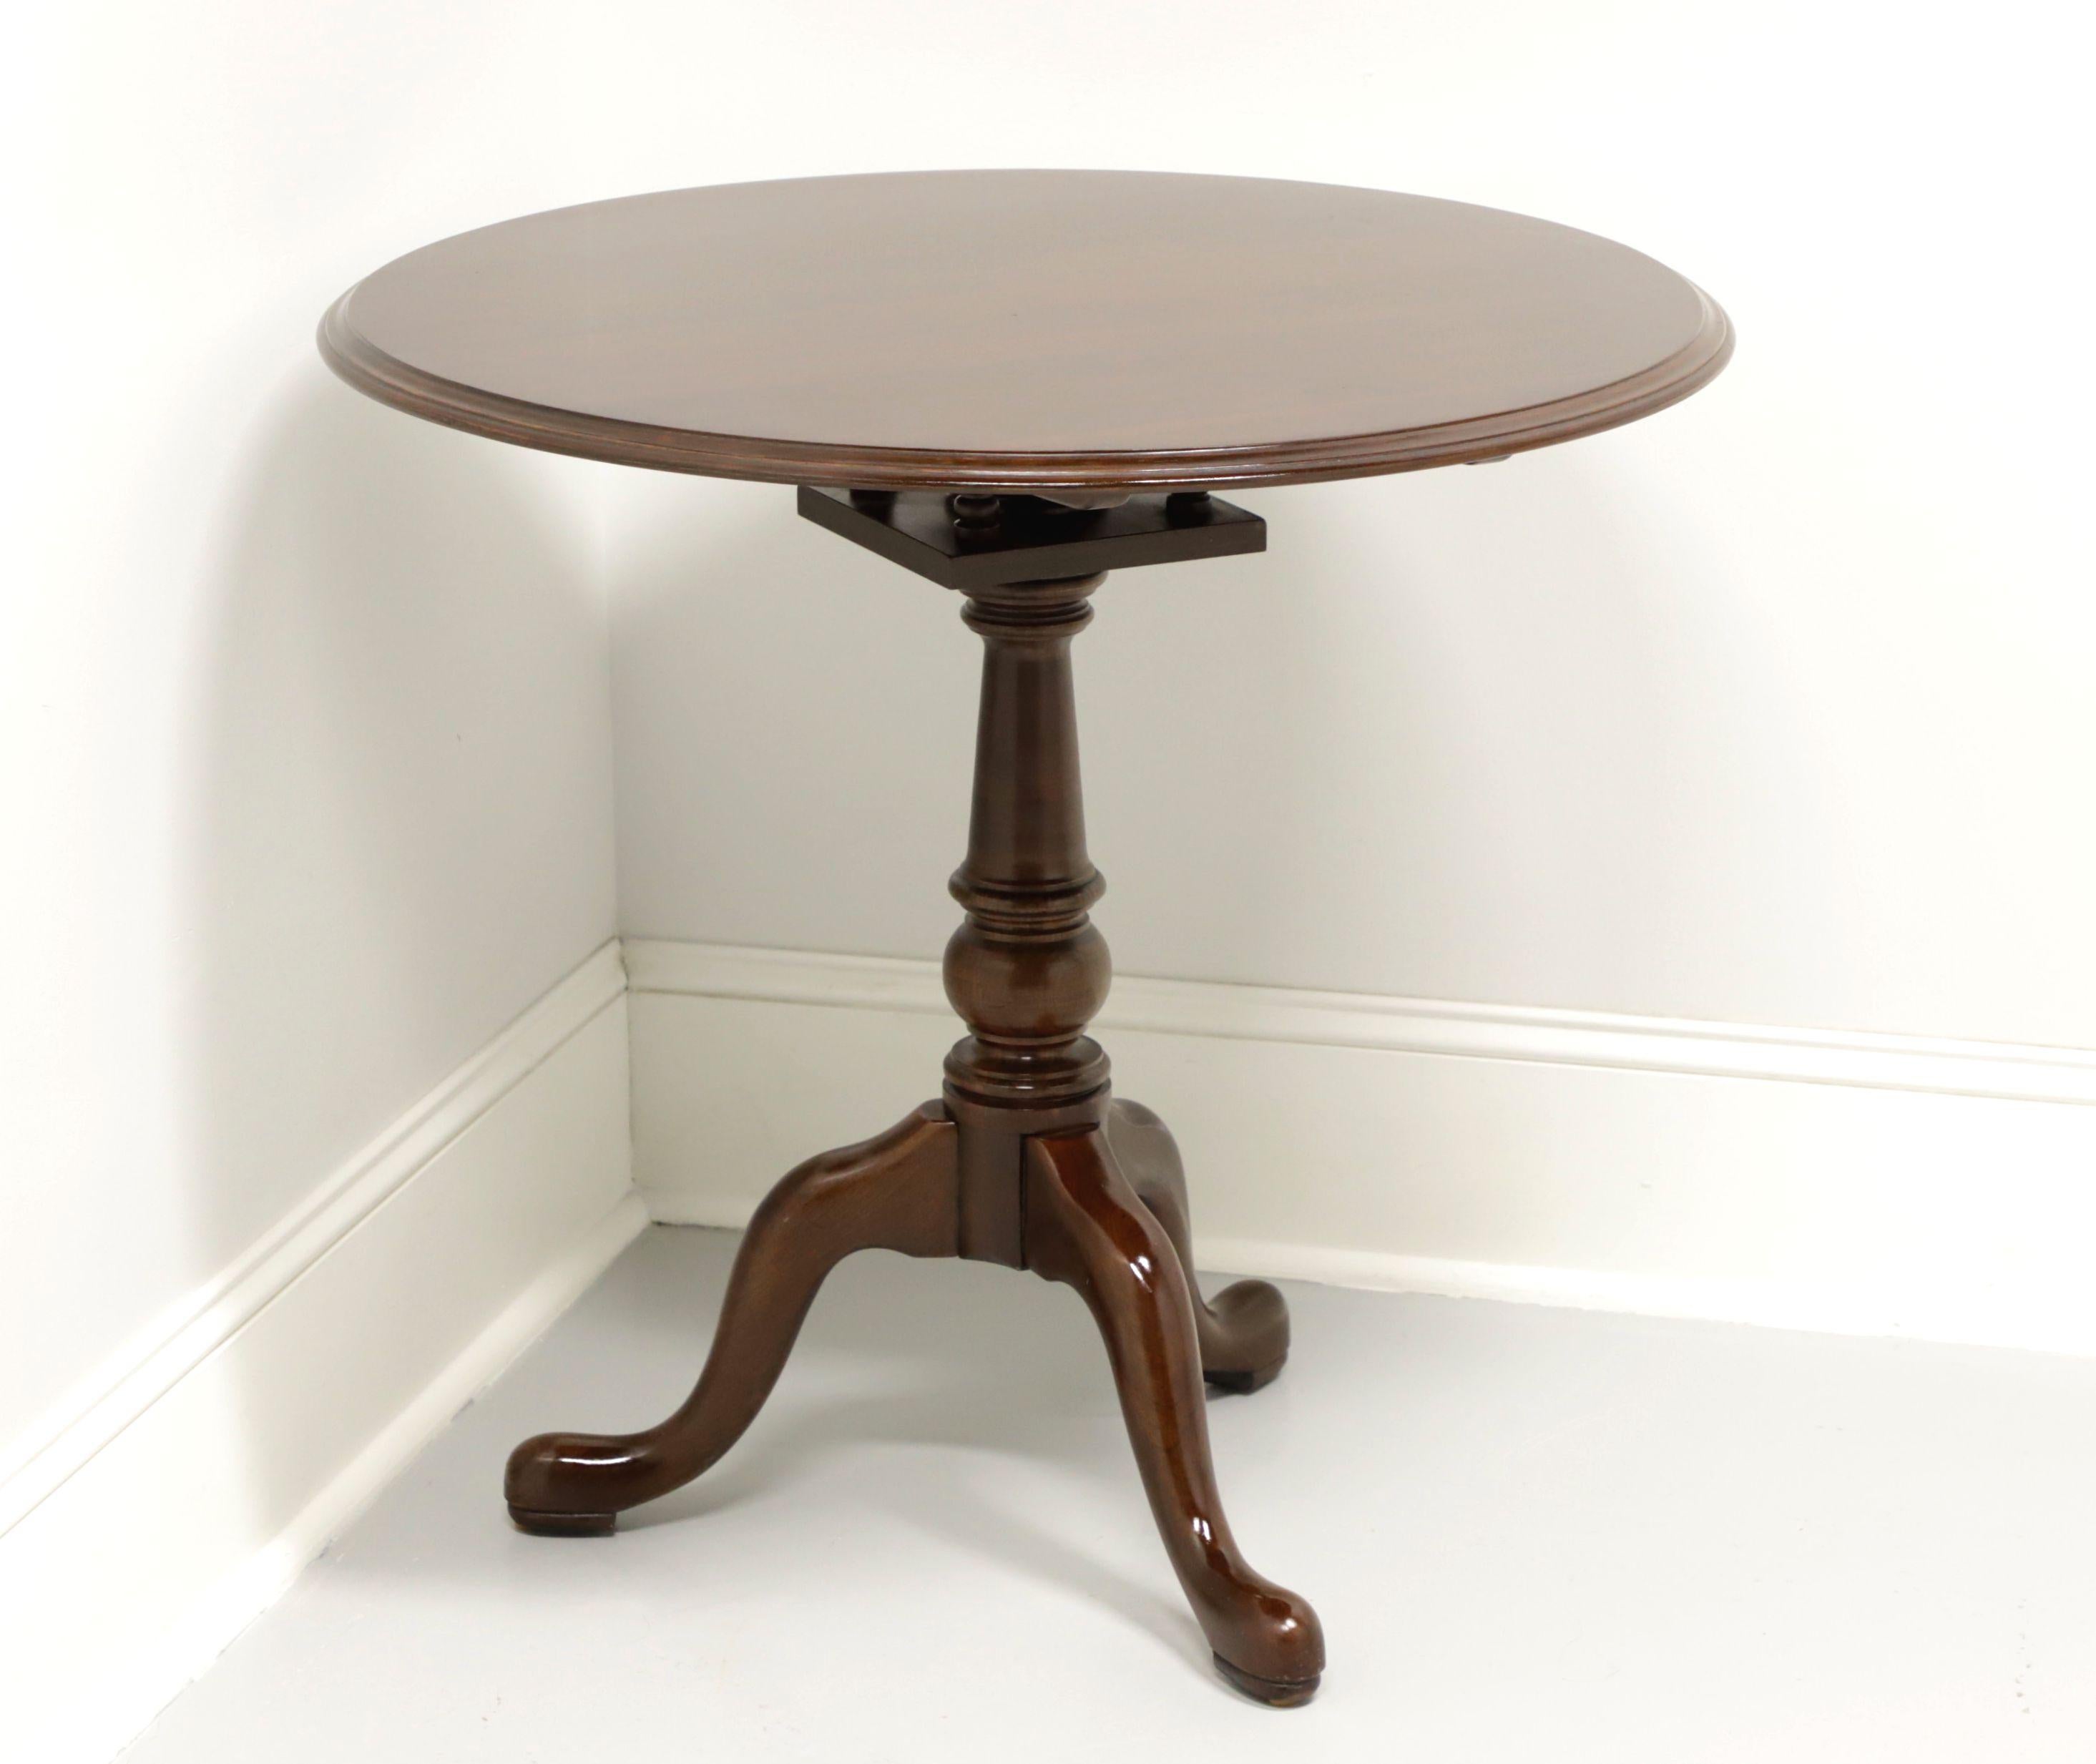 A Queen Anne style tilt-top pie crust table by Ethan Allen. Solid cherry with round top, ribbed edge, brass latch, turned pedestal with swivel, three legs and pad feet. Made in the USA, in the late 20th Century.

Measures:  Overall: Top Down: 30.25w